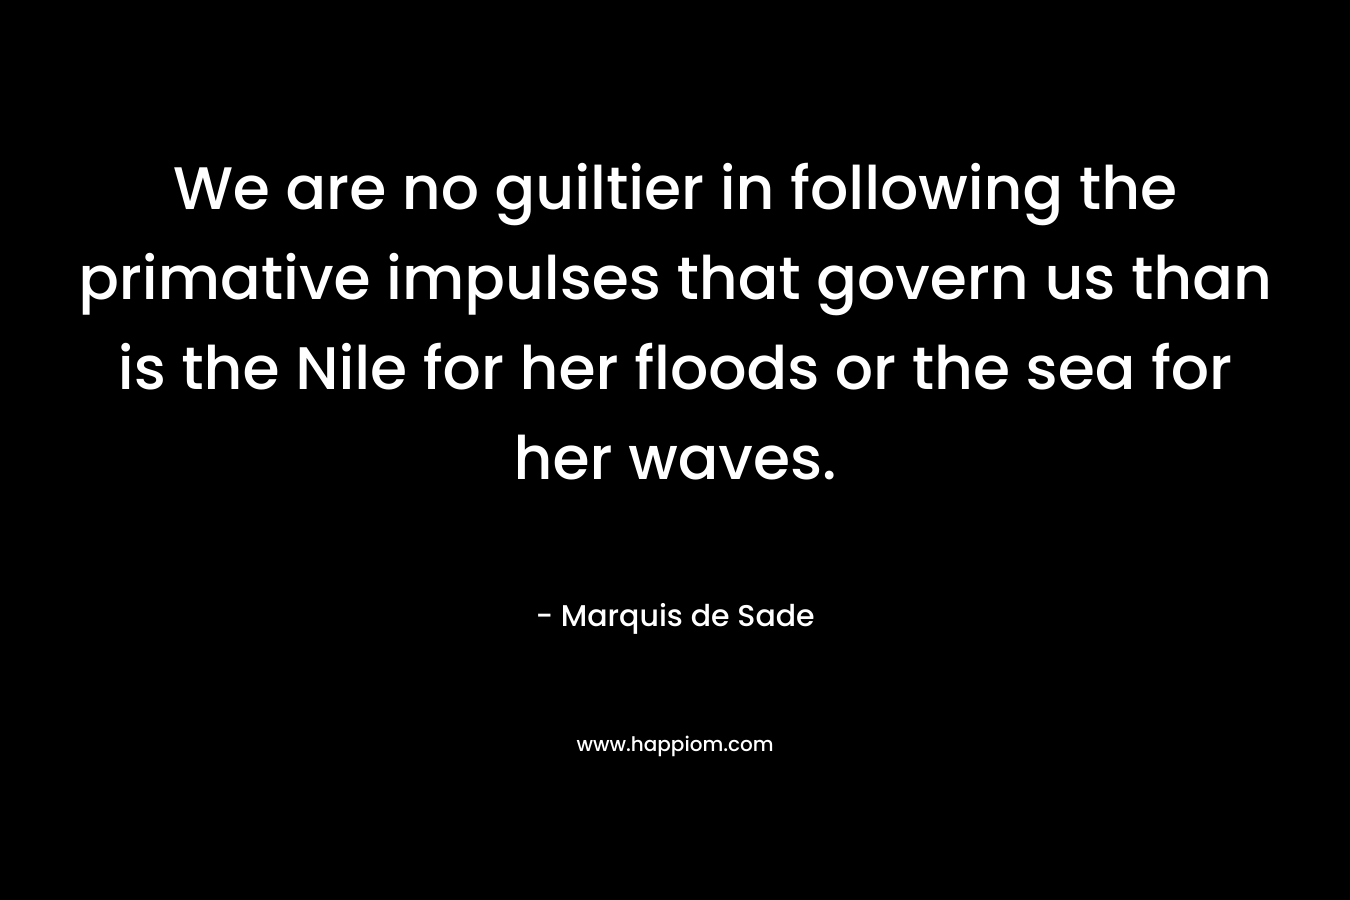 We are no guiltier in following the primative impulses that govern us than is the Nile for her floods or the sea for her waves. – Marquis de Sade